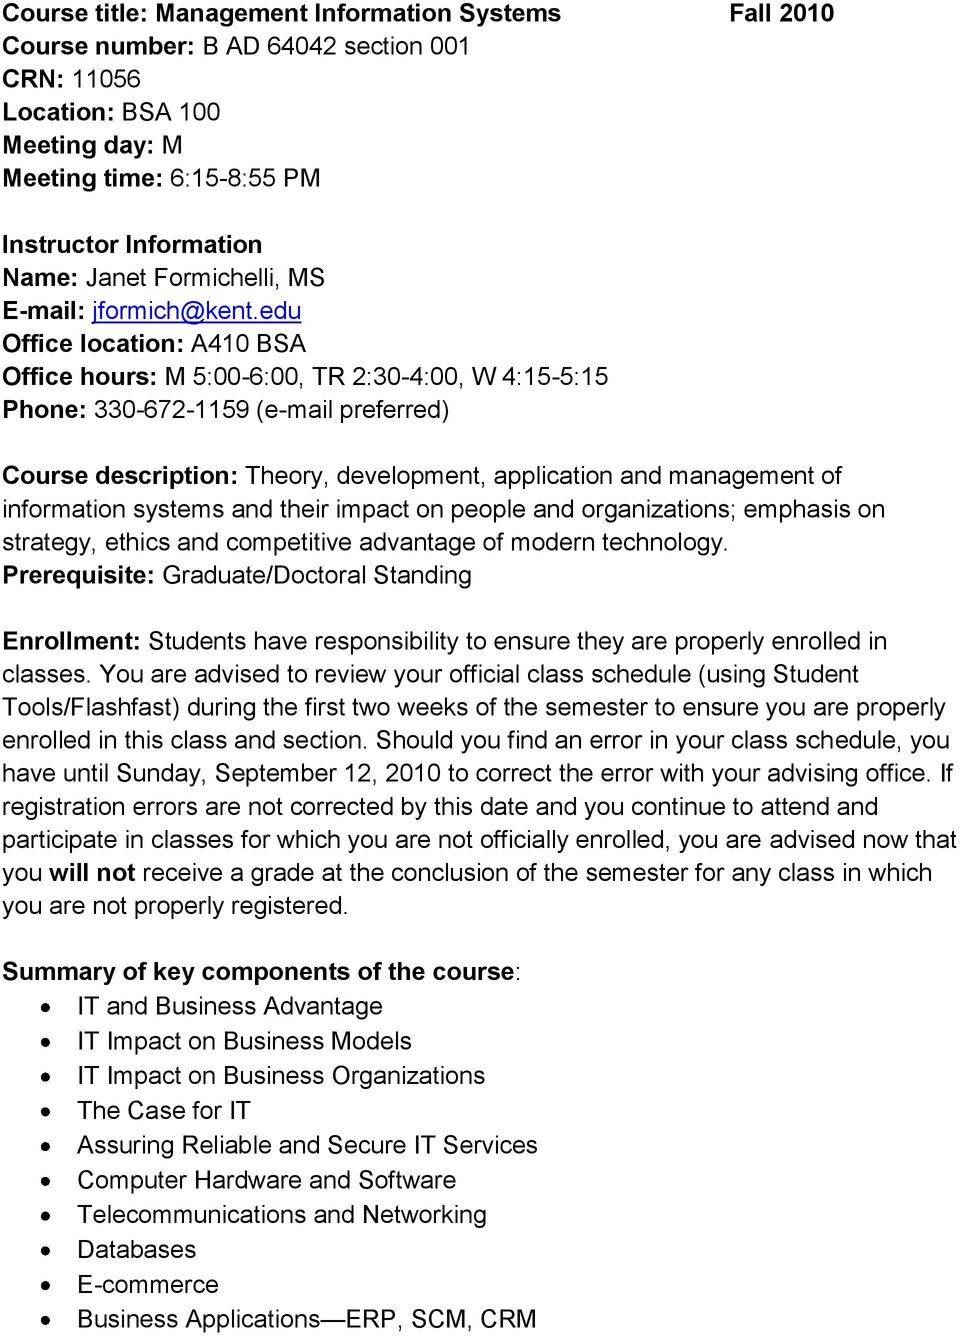 edu Office location: A410 BSA Office hours: M 5:00-6:00, TR 2:30-4:00, W 4:15-5:15 Phone: 330-672-1159 (e-mail preferred) Course description: Theory, development, application and management of